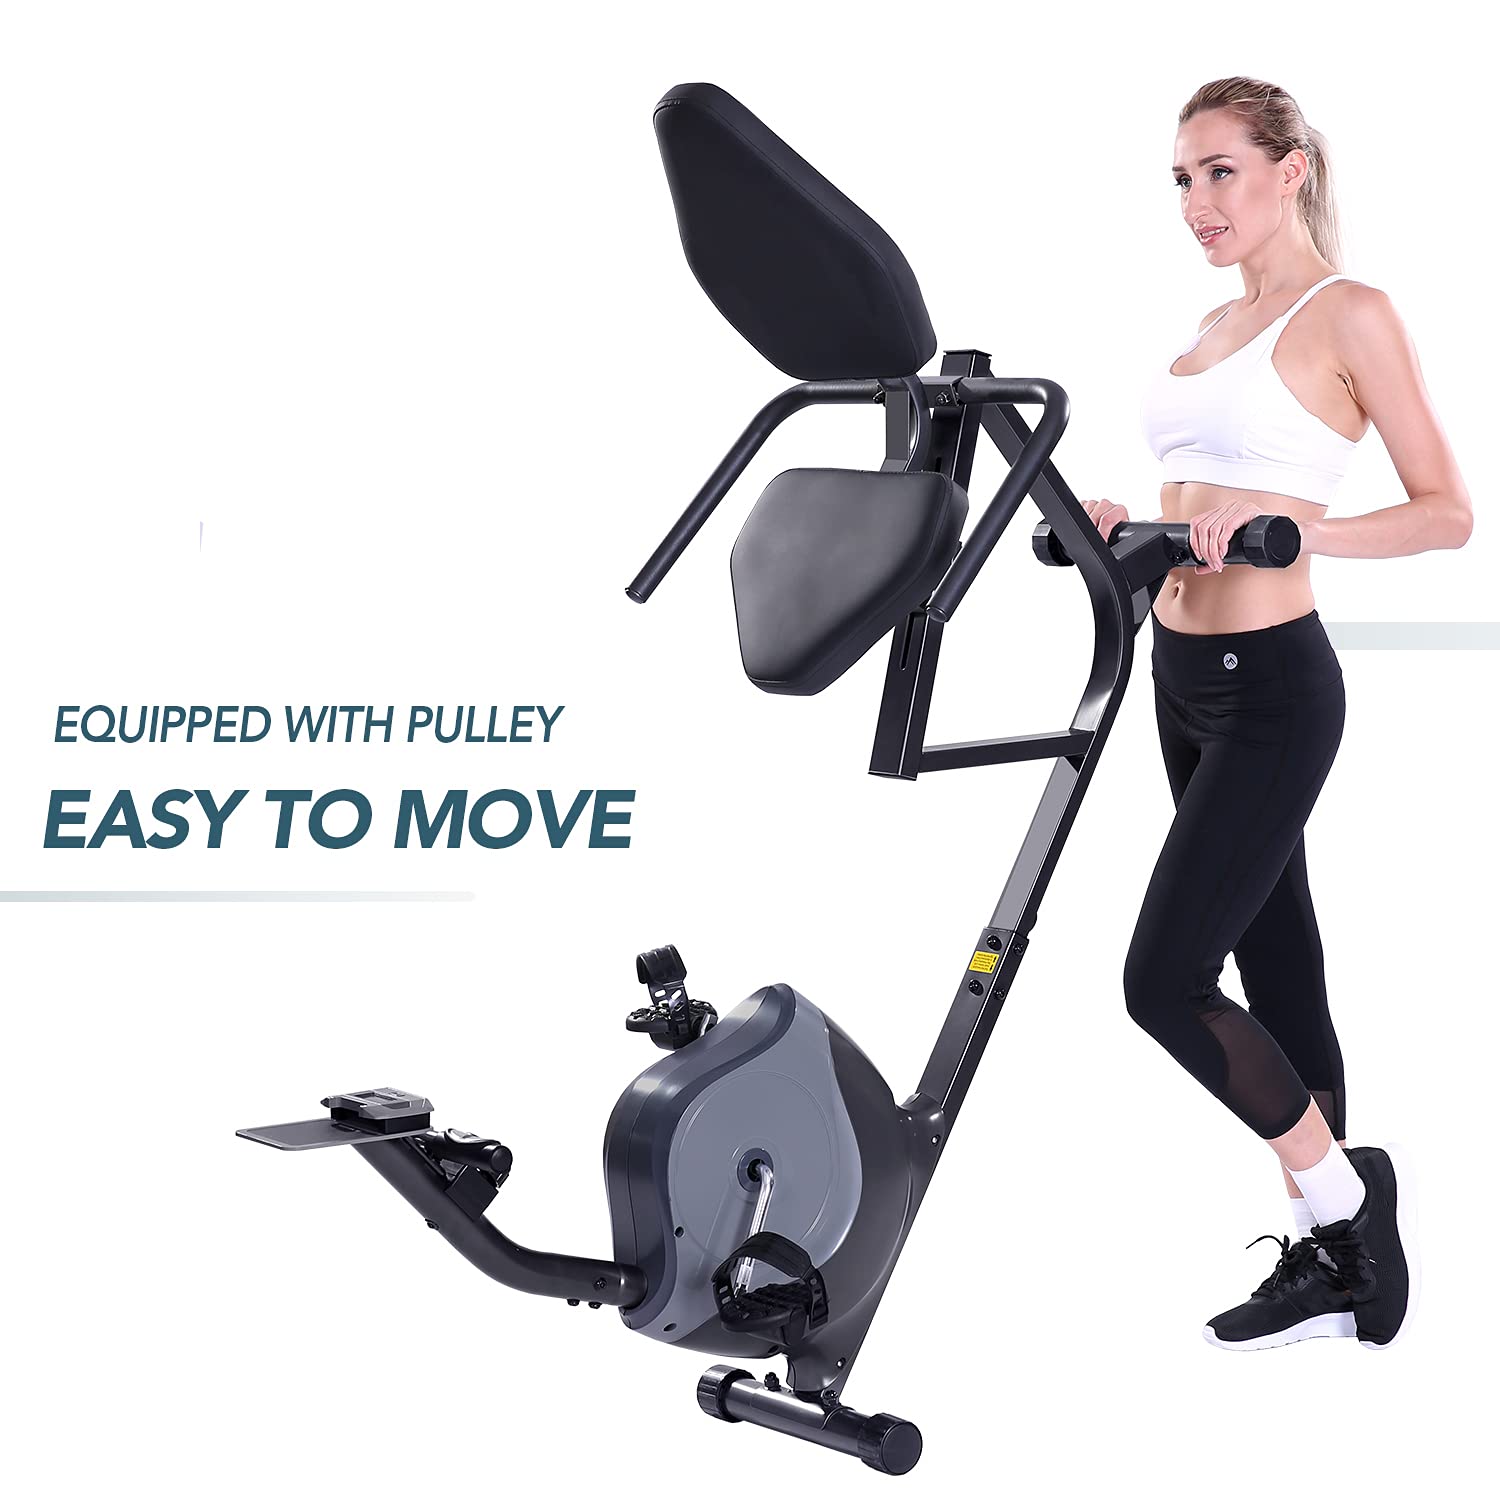 Load image into Gallery viewer, Maxkare Magnetic Recumbent Exercise Bike with Pulse Rate Monitoring, phone holder and Quick Adjustable Seat for Home Workout, 300 lb Capacity
